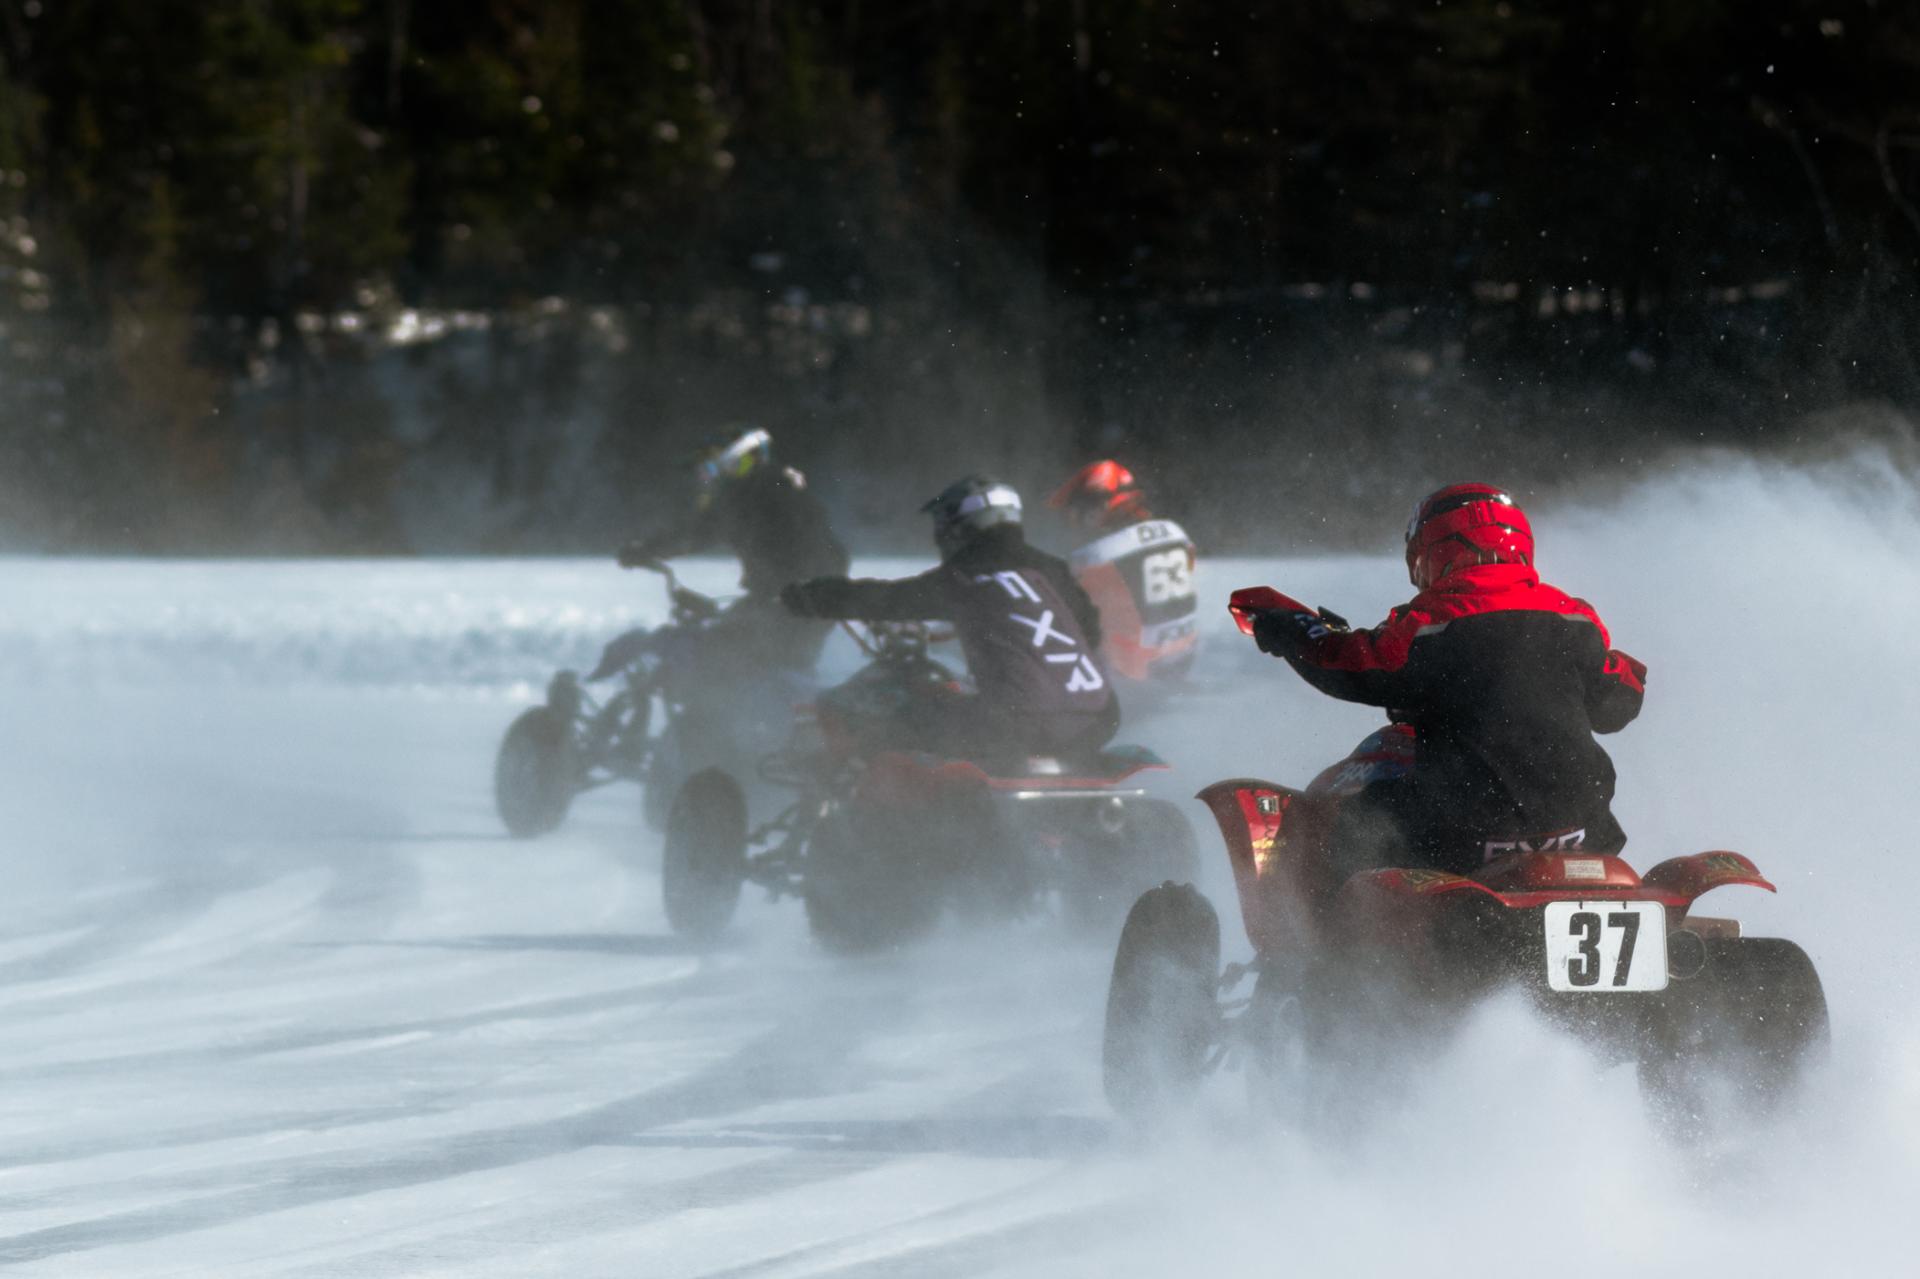 A dynamic image featuring four ATVs participating in exhilarating ice racing.